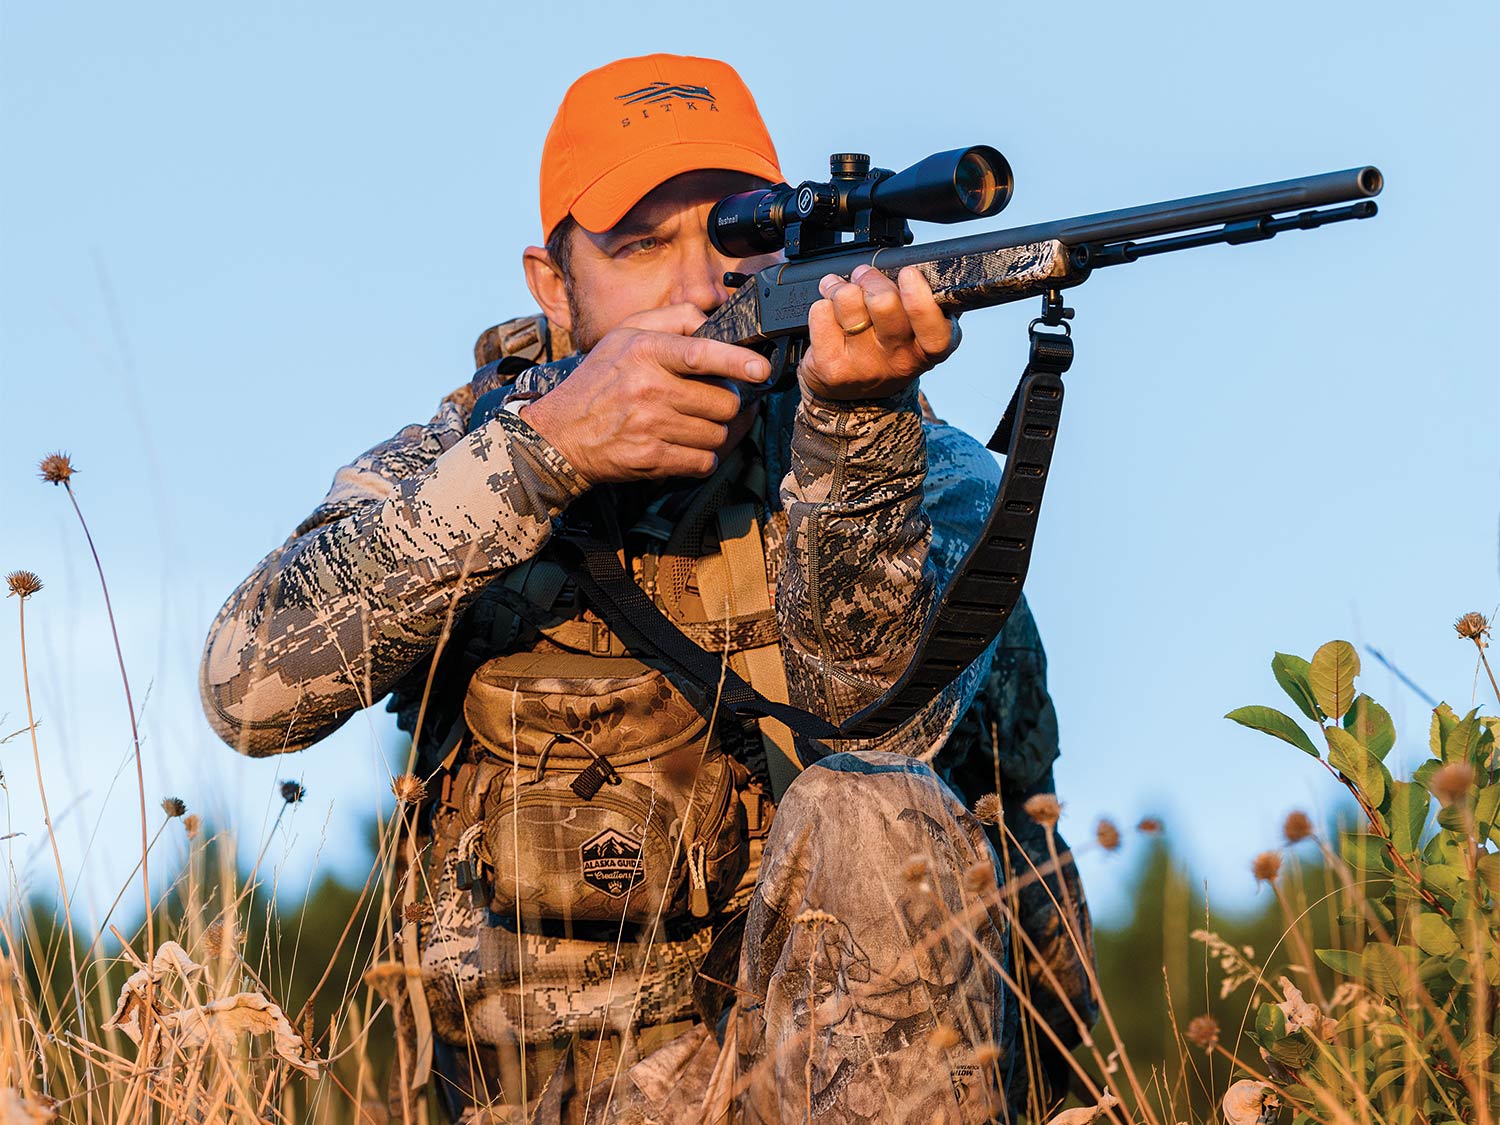 A hunter in full camo and orange cap holds a rifle to their shoulder while aiming, preparing to fire.